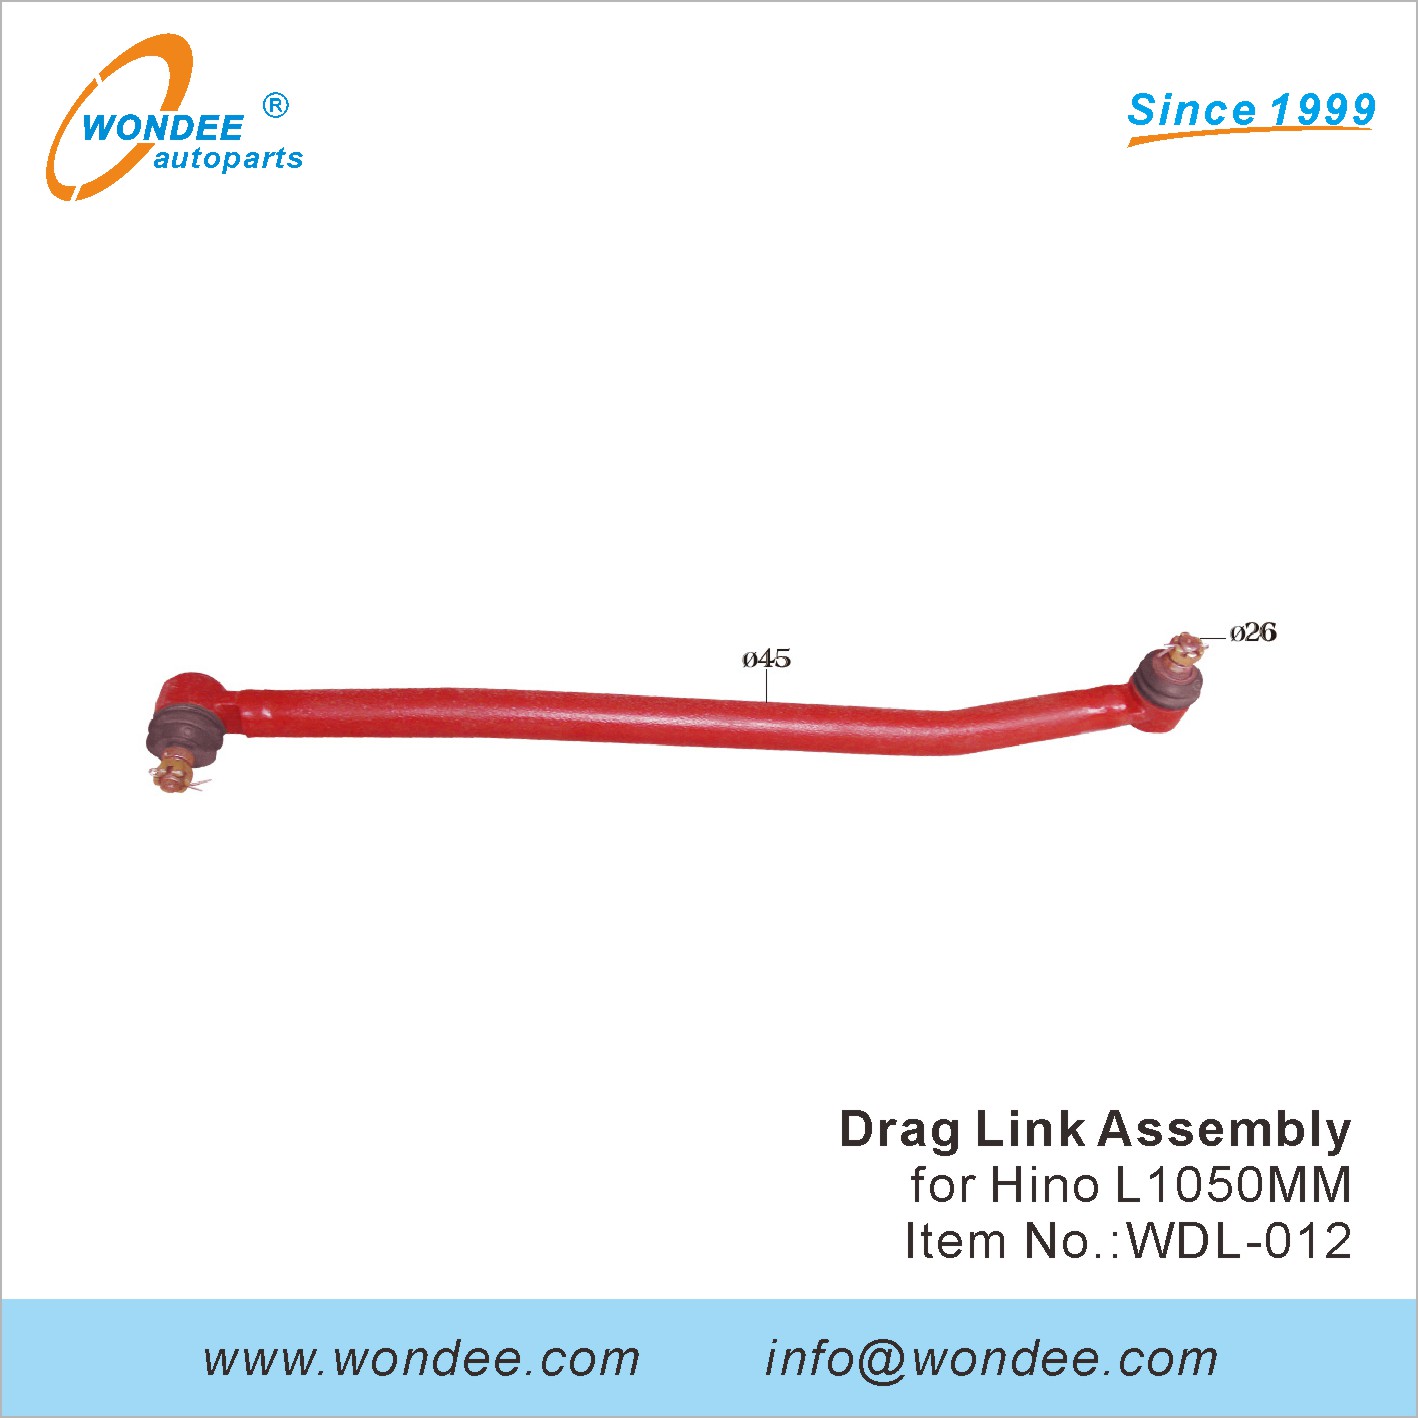 WONDEE drag link assembly (12)